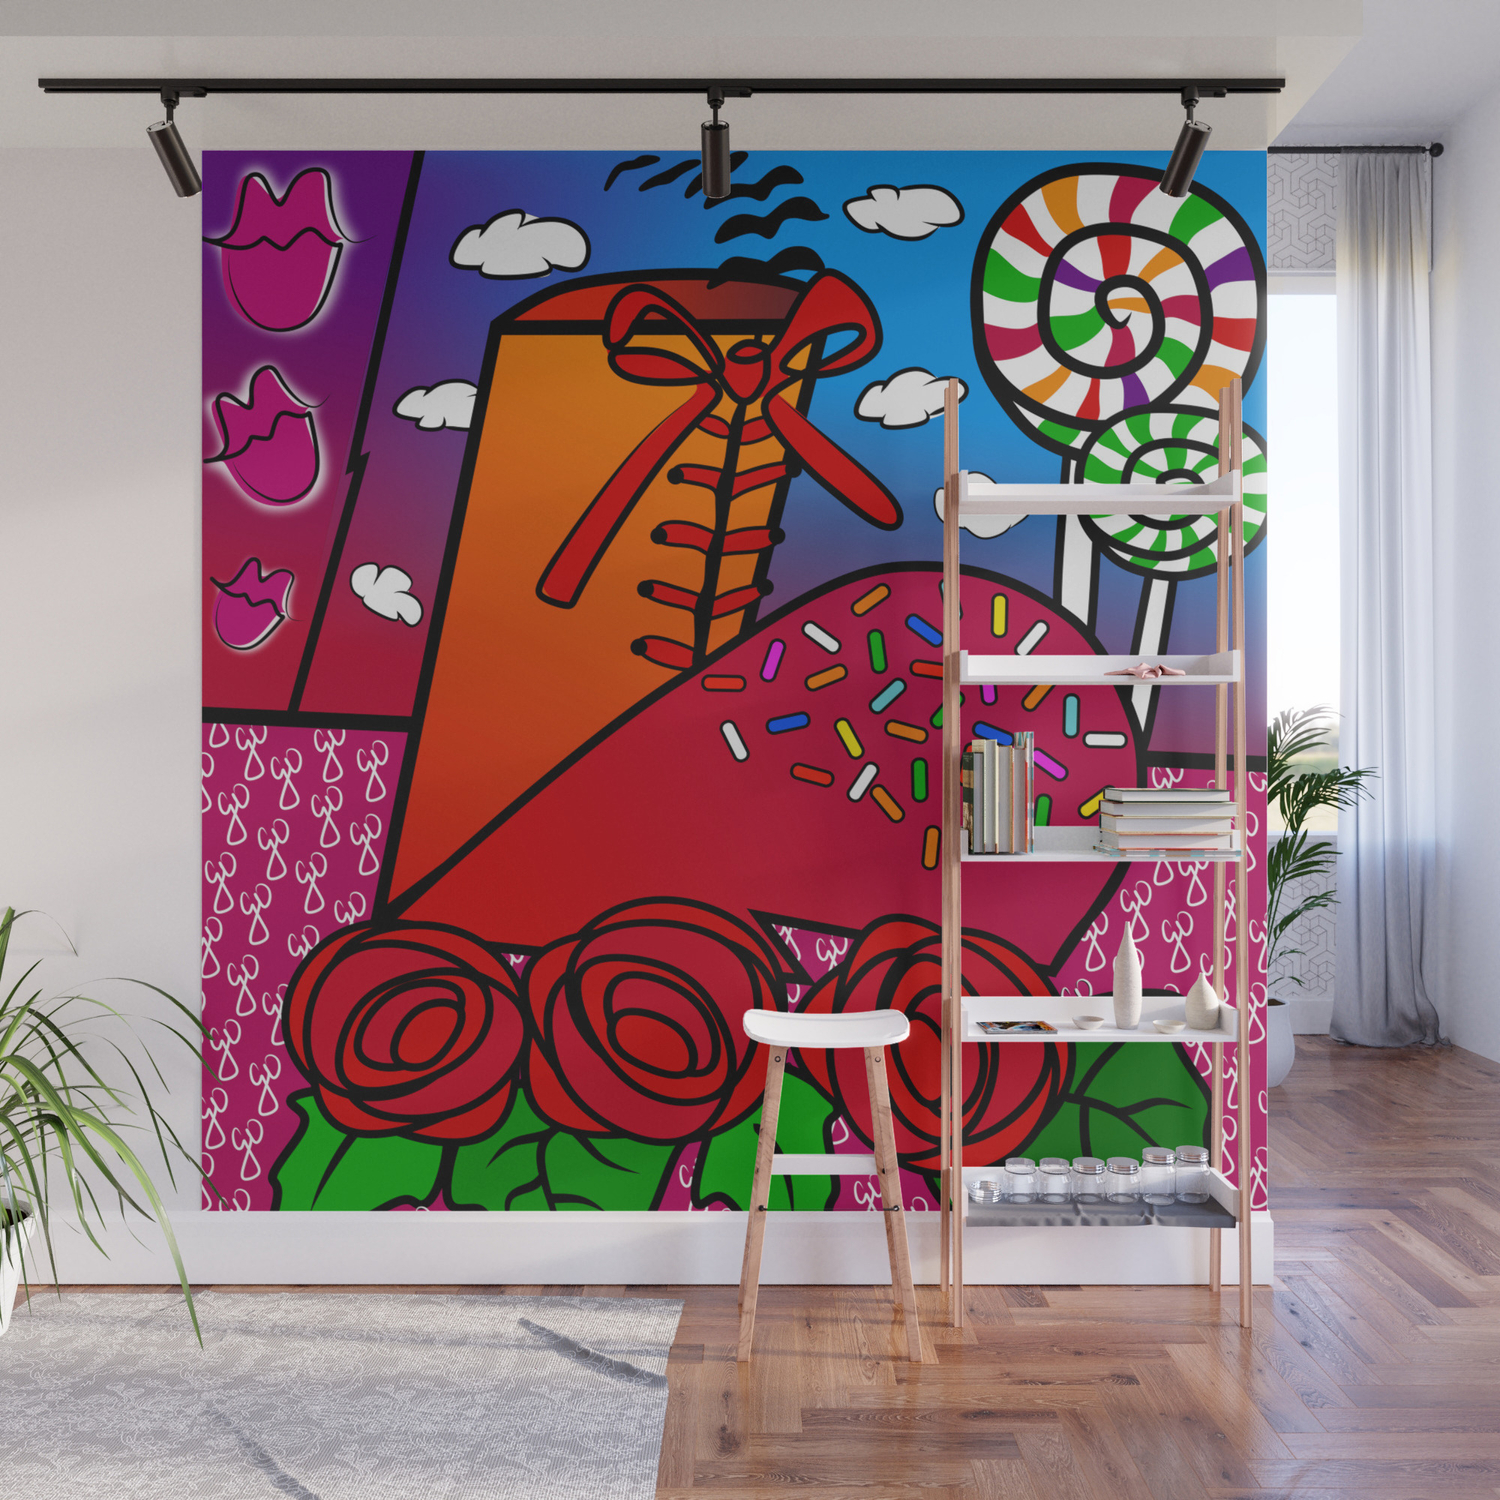 Almost teenage girl Wall Mural by